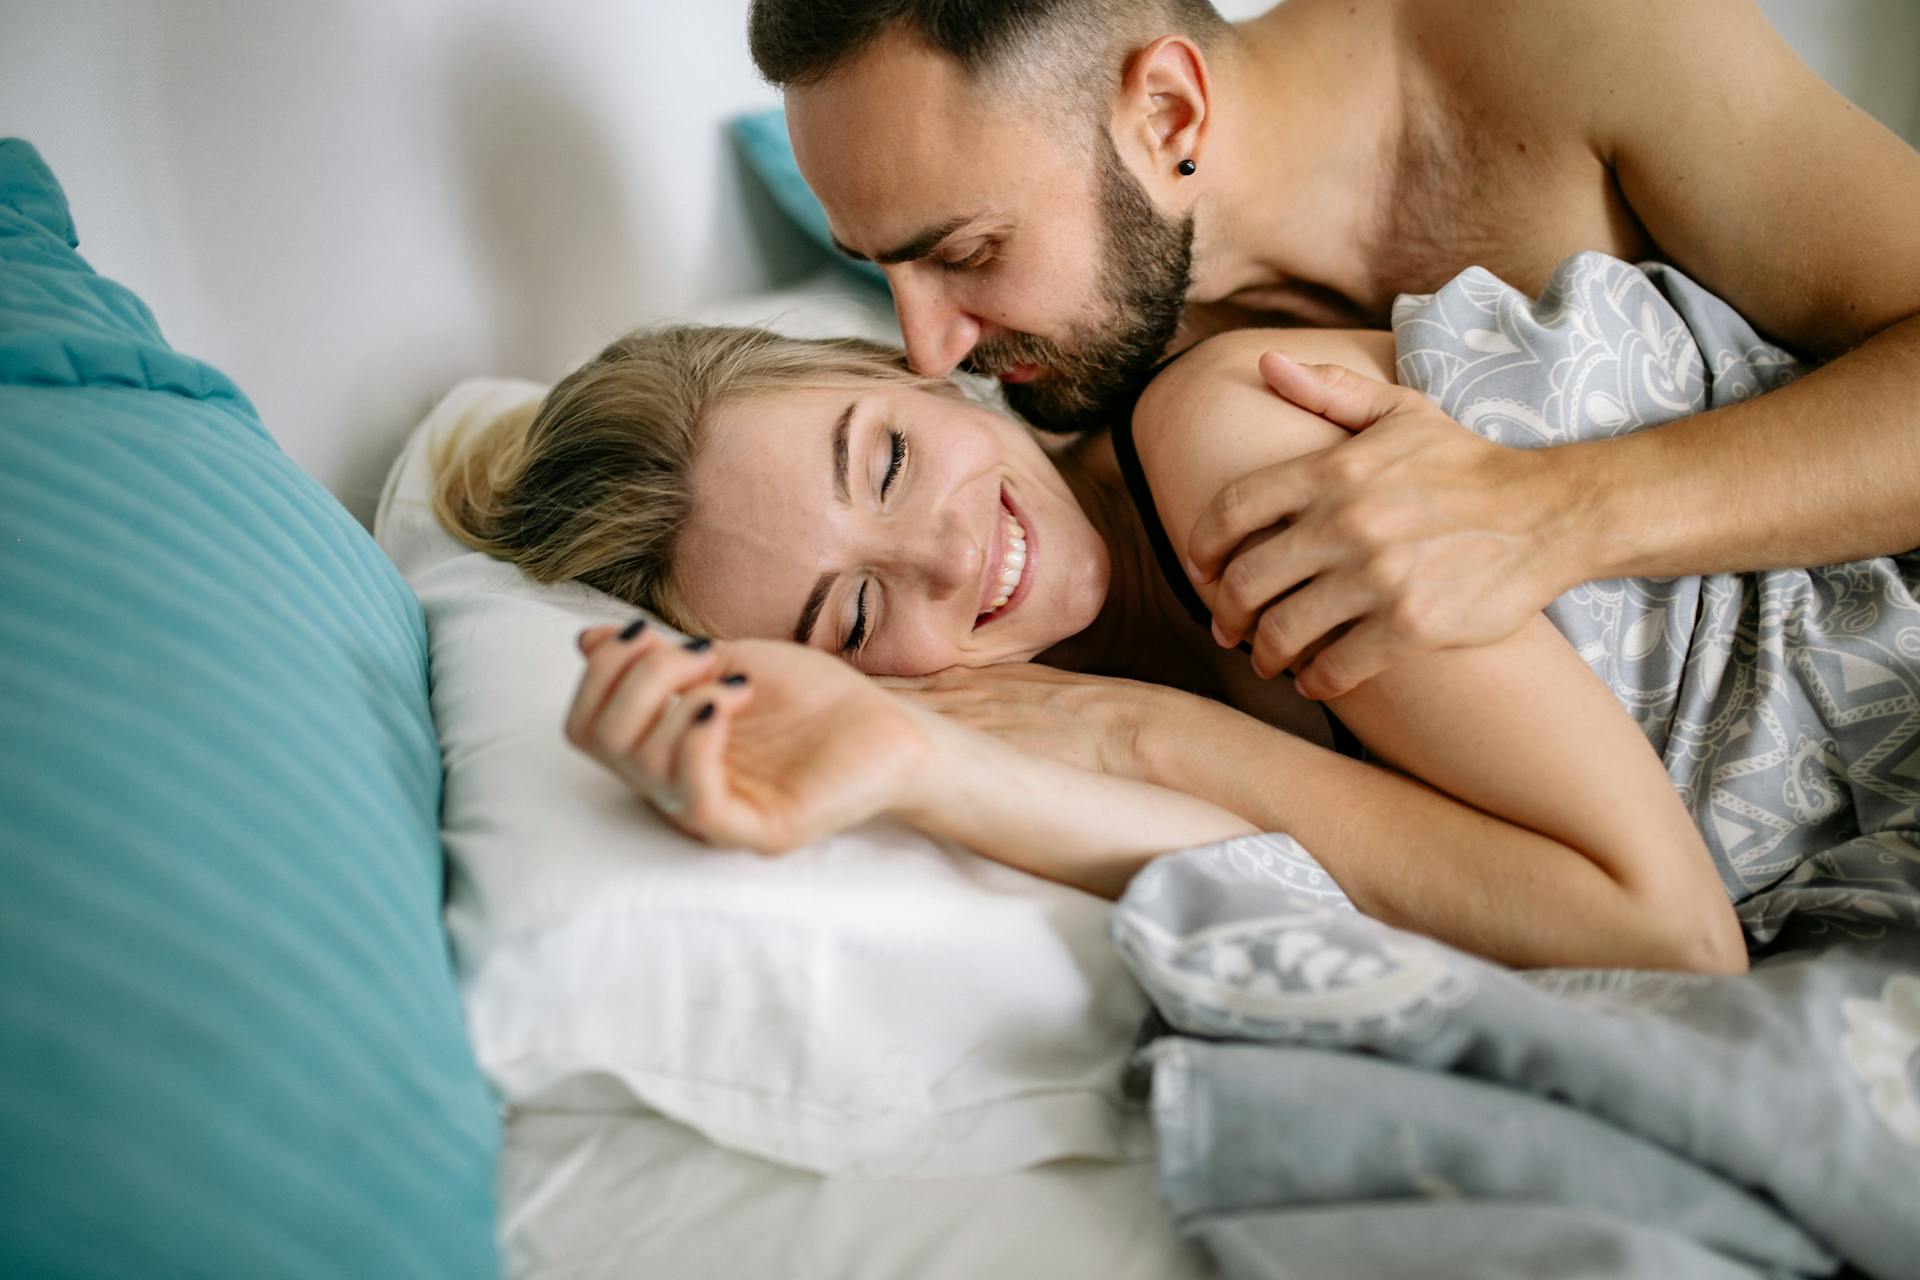 A man cuddling with his wife in the morning | Source: Pexels